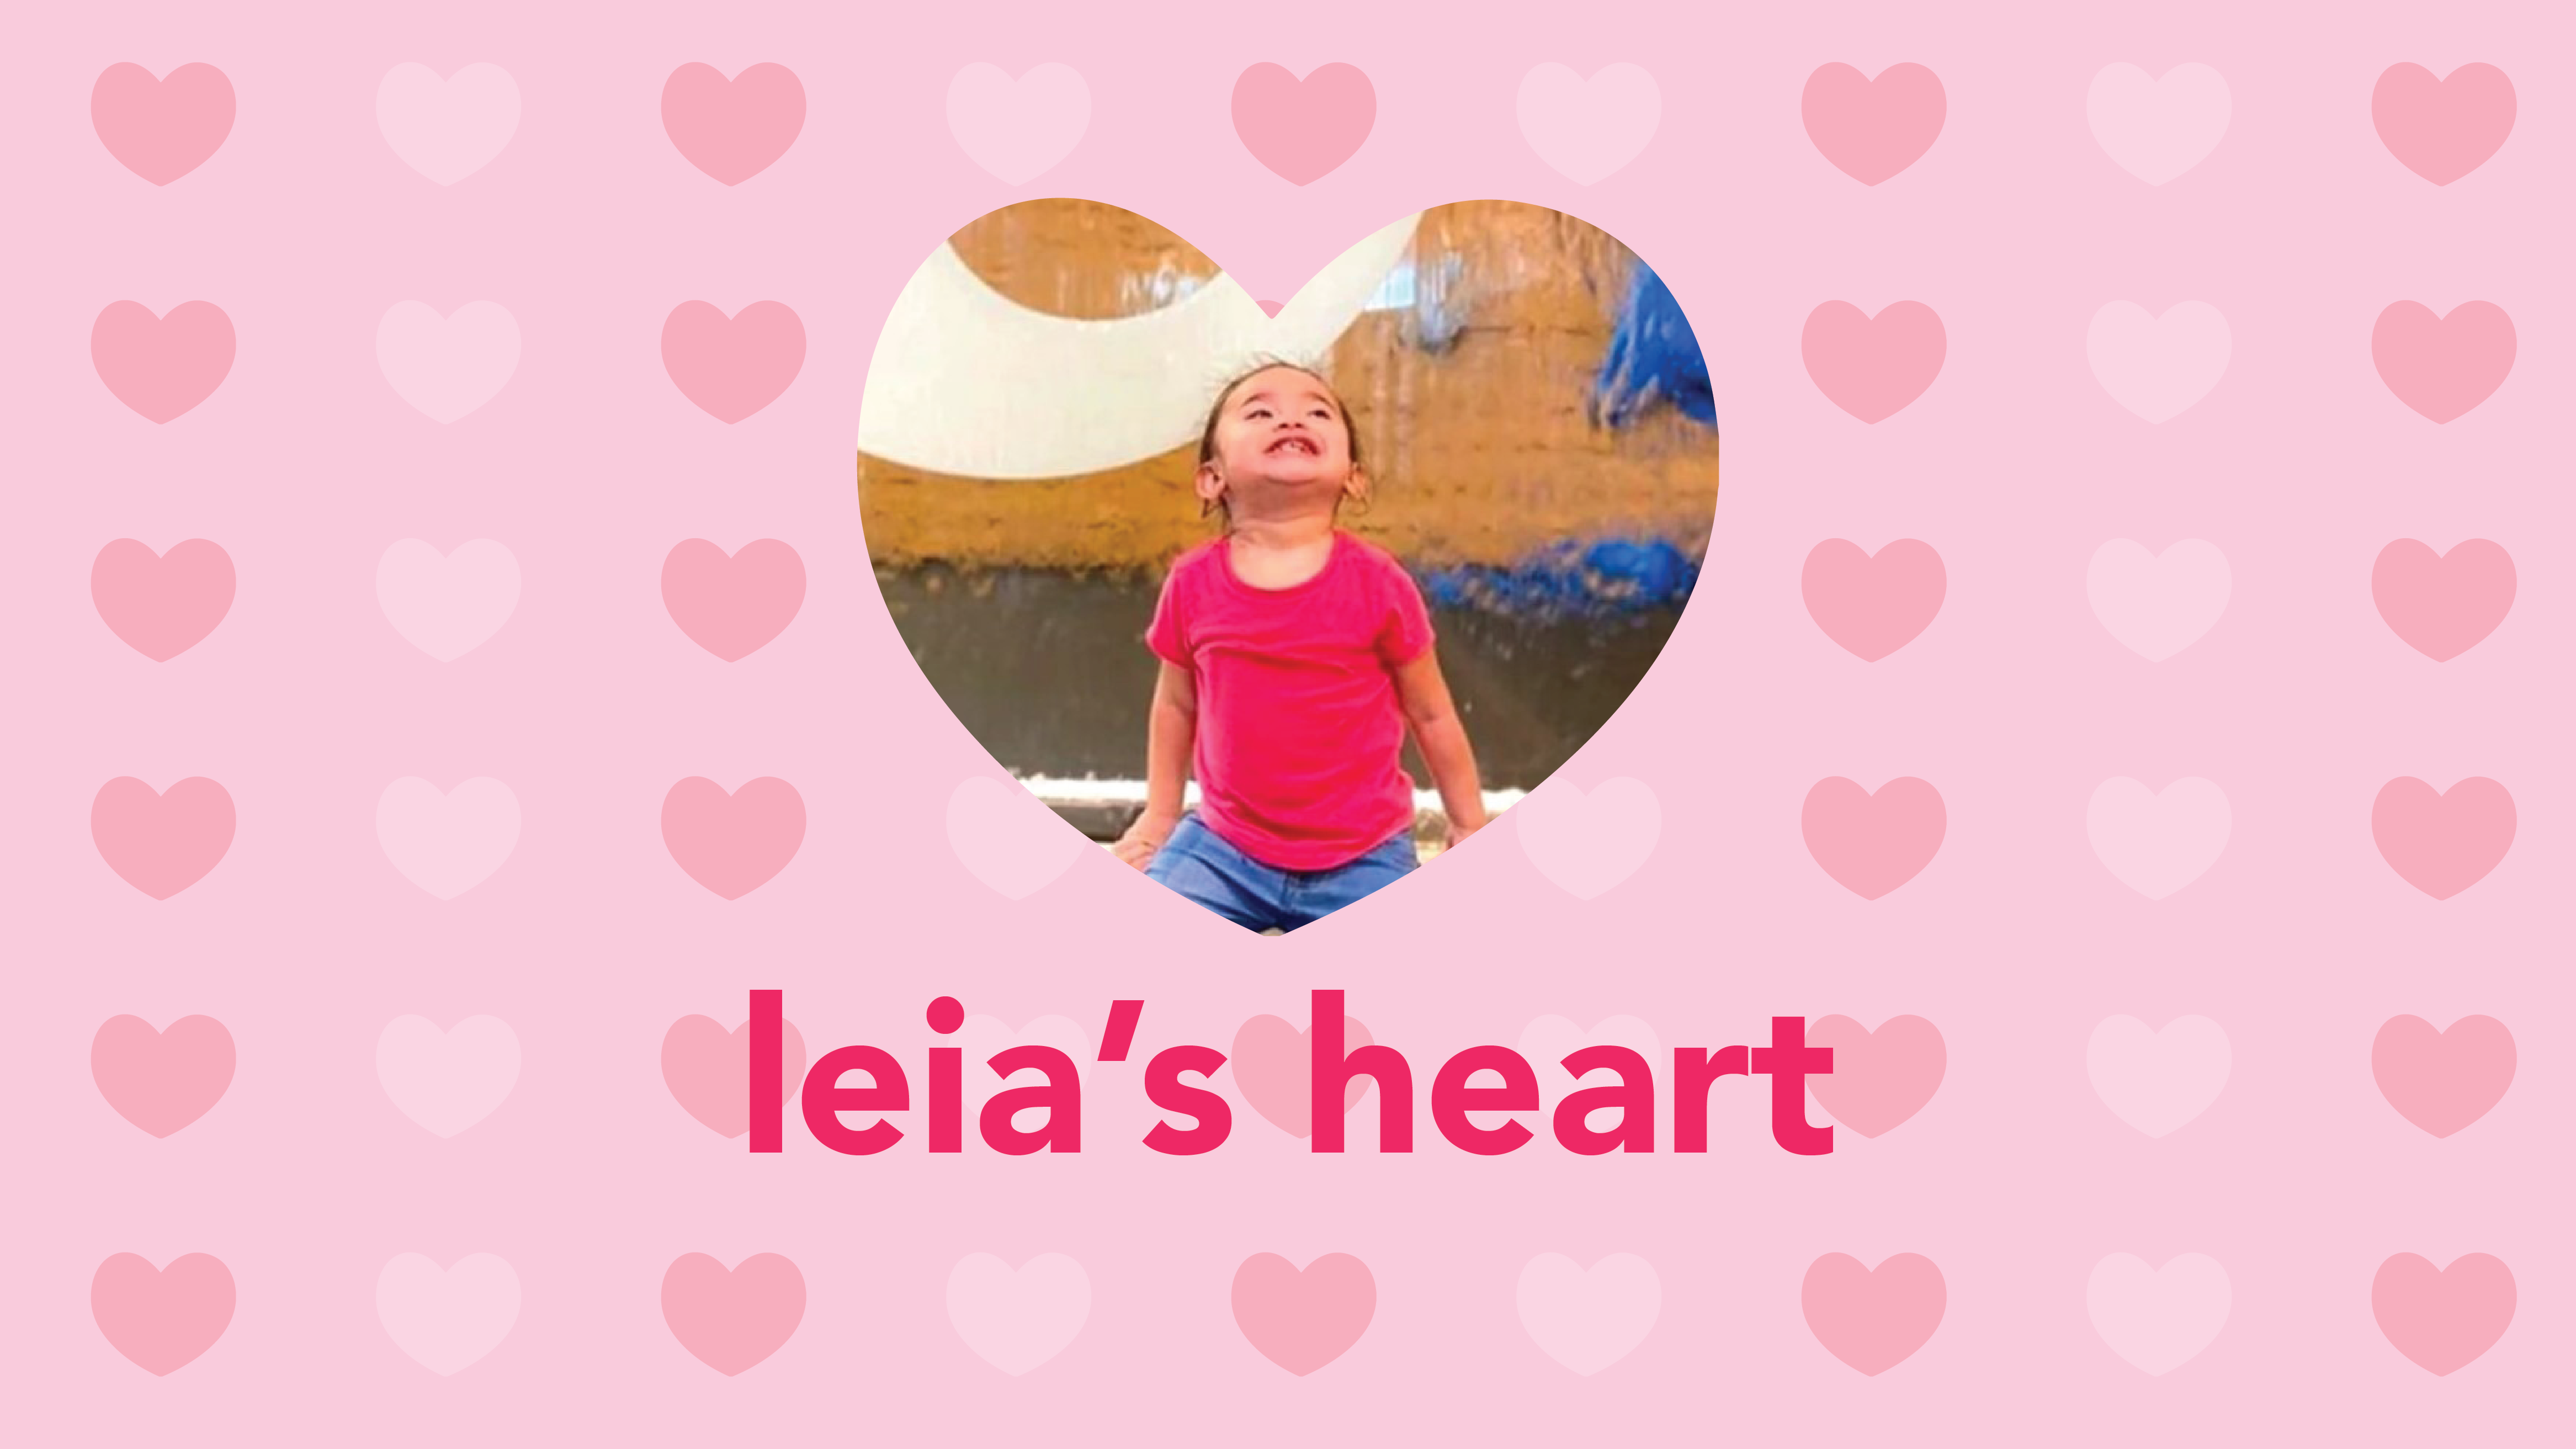 graphic with text "leia's heart" with image of girl looking up with pink heart drawing background